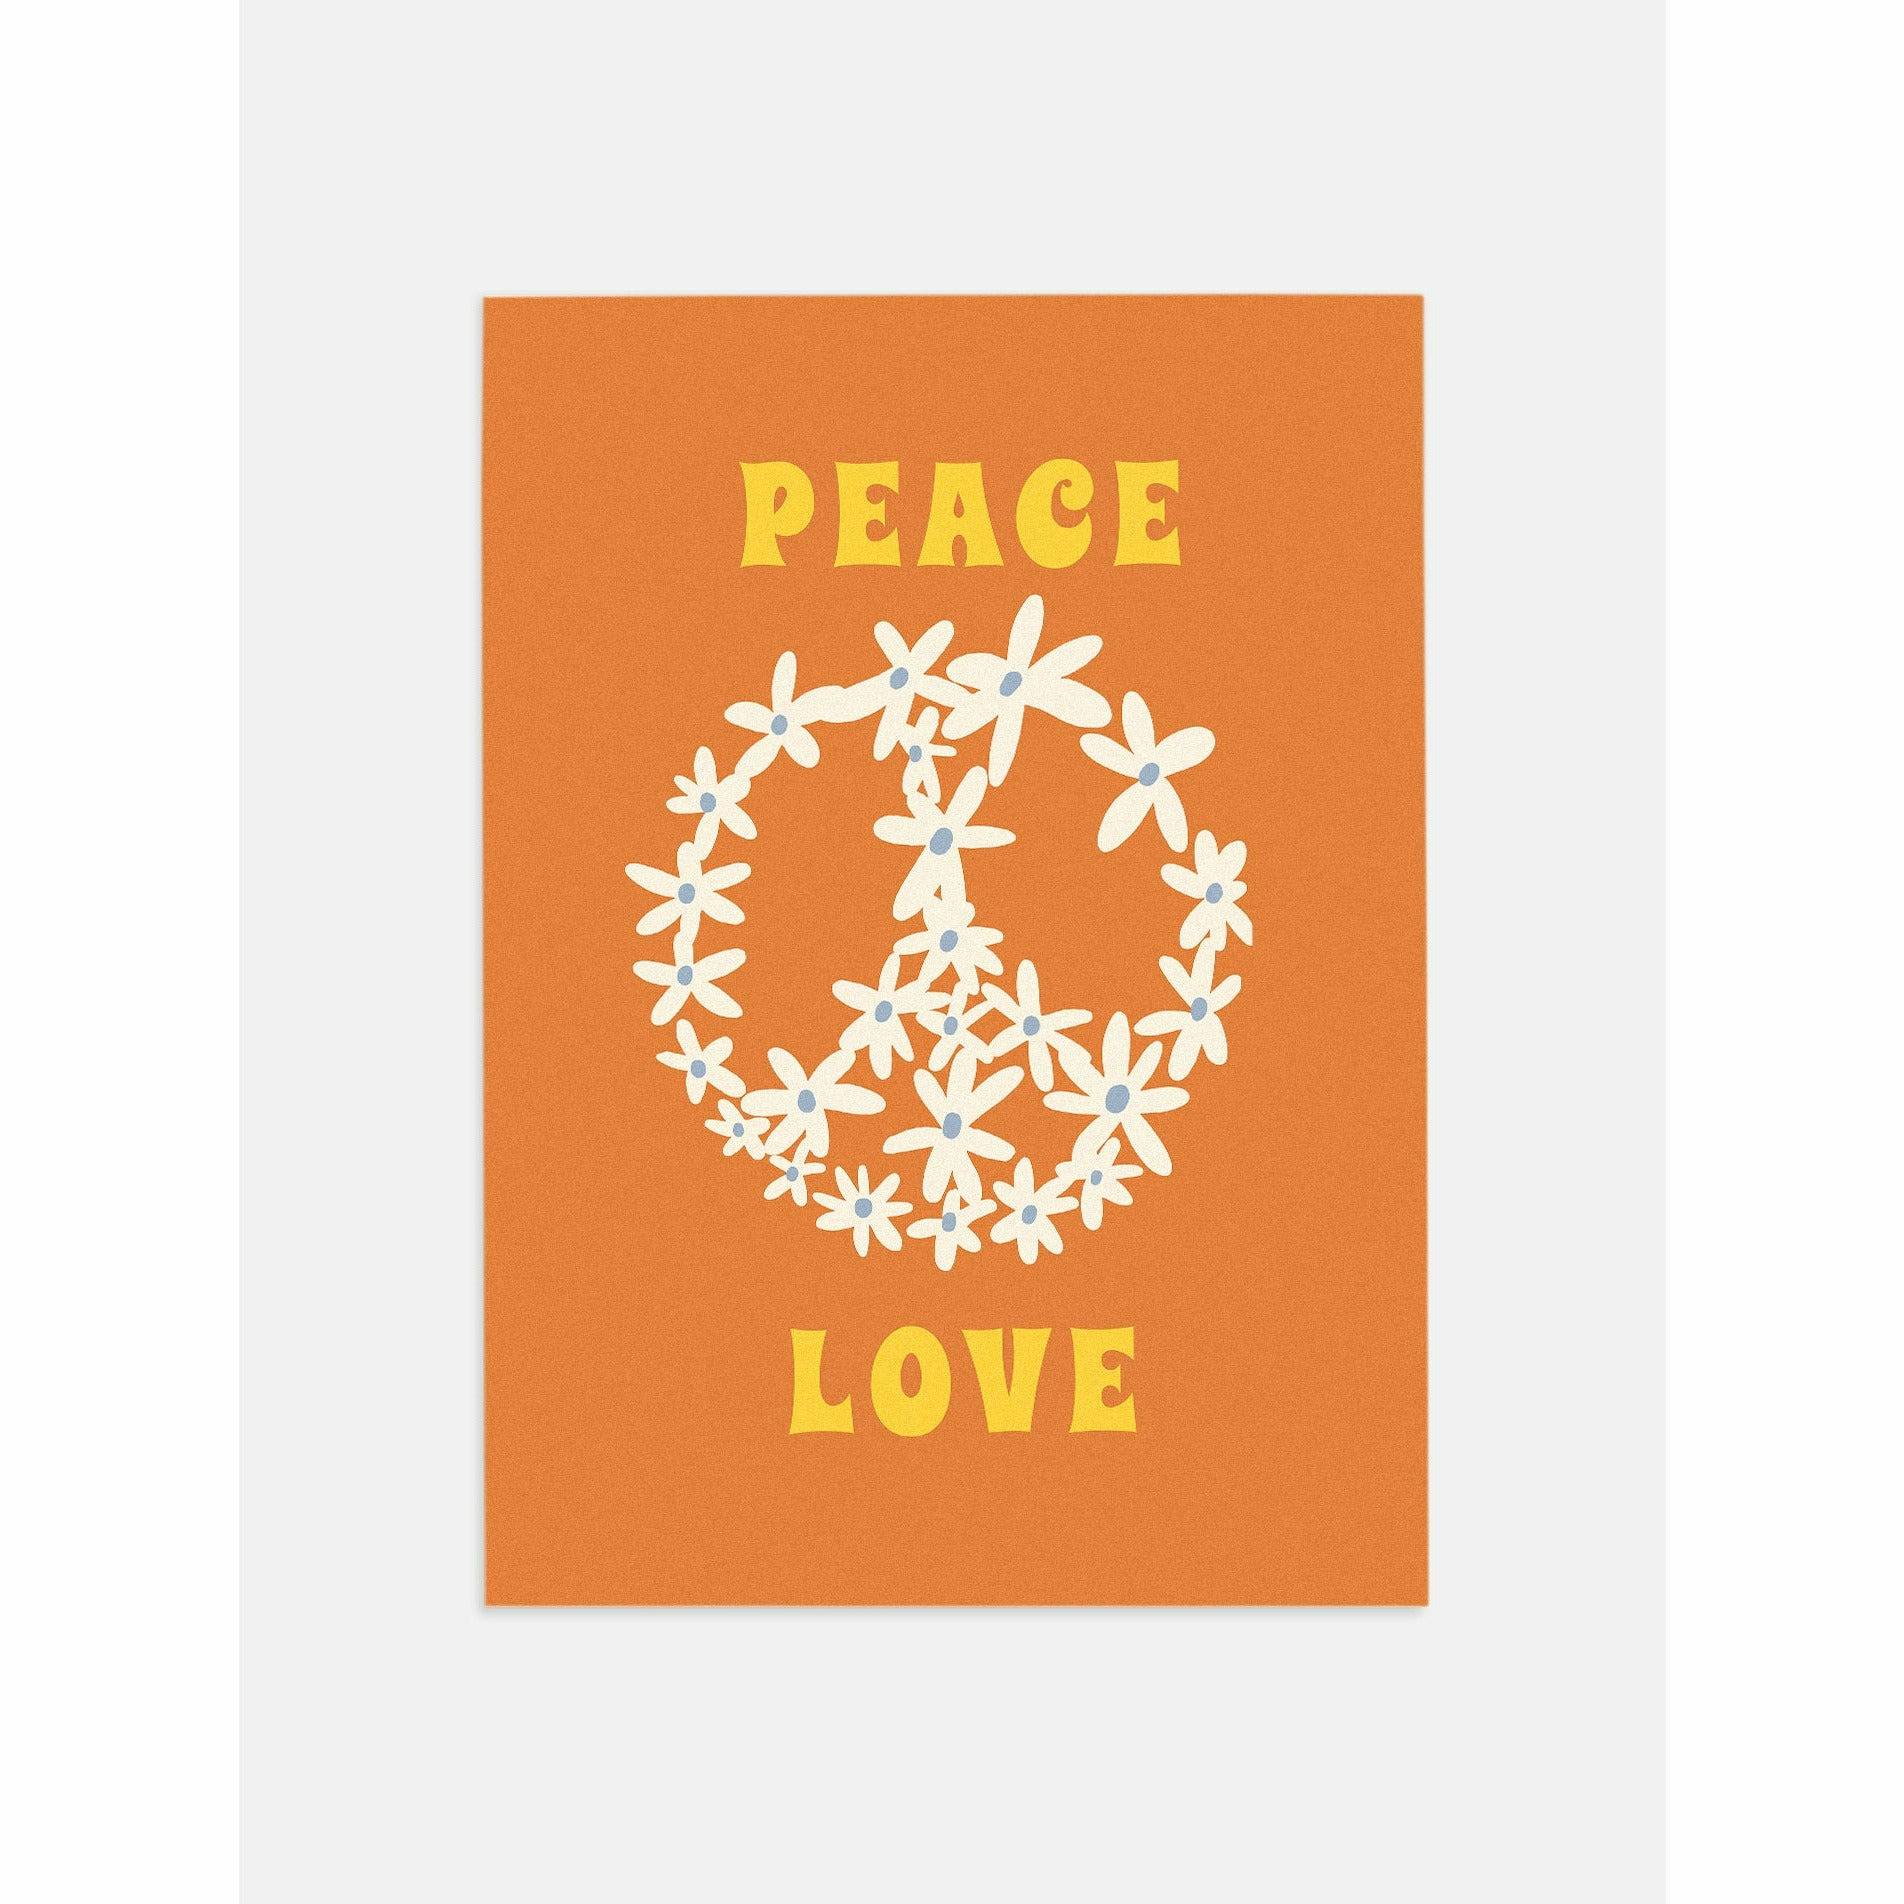 Peace Love Poster 